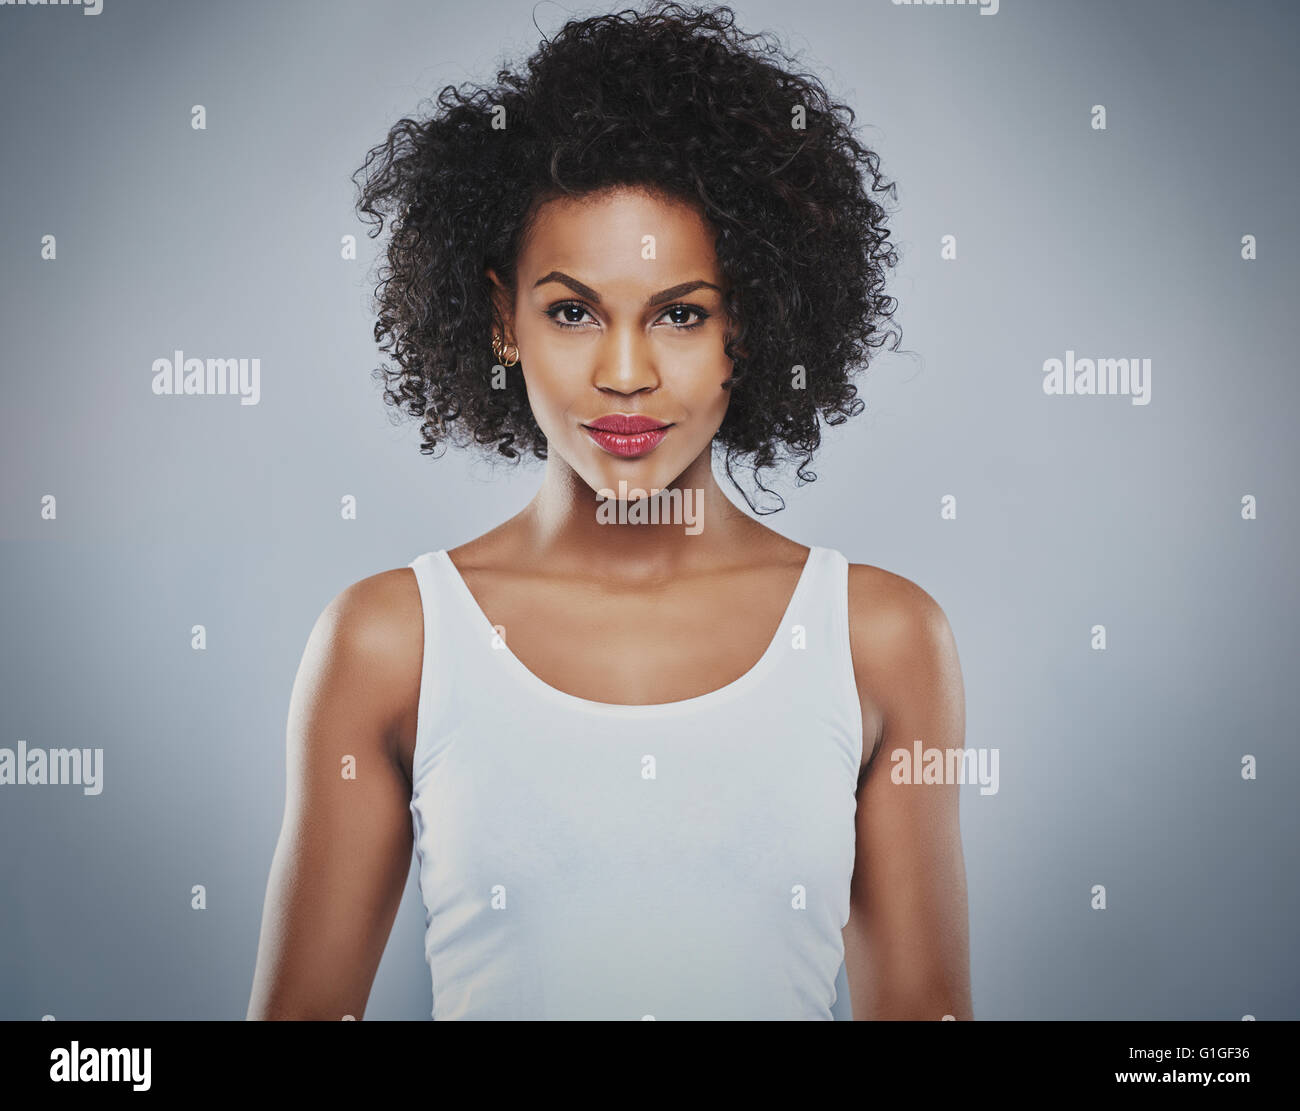 Centered front view of single pretty grinning woman wearing white sleeveless undershirt and calm expression over gray background Stock Photo